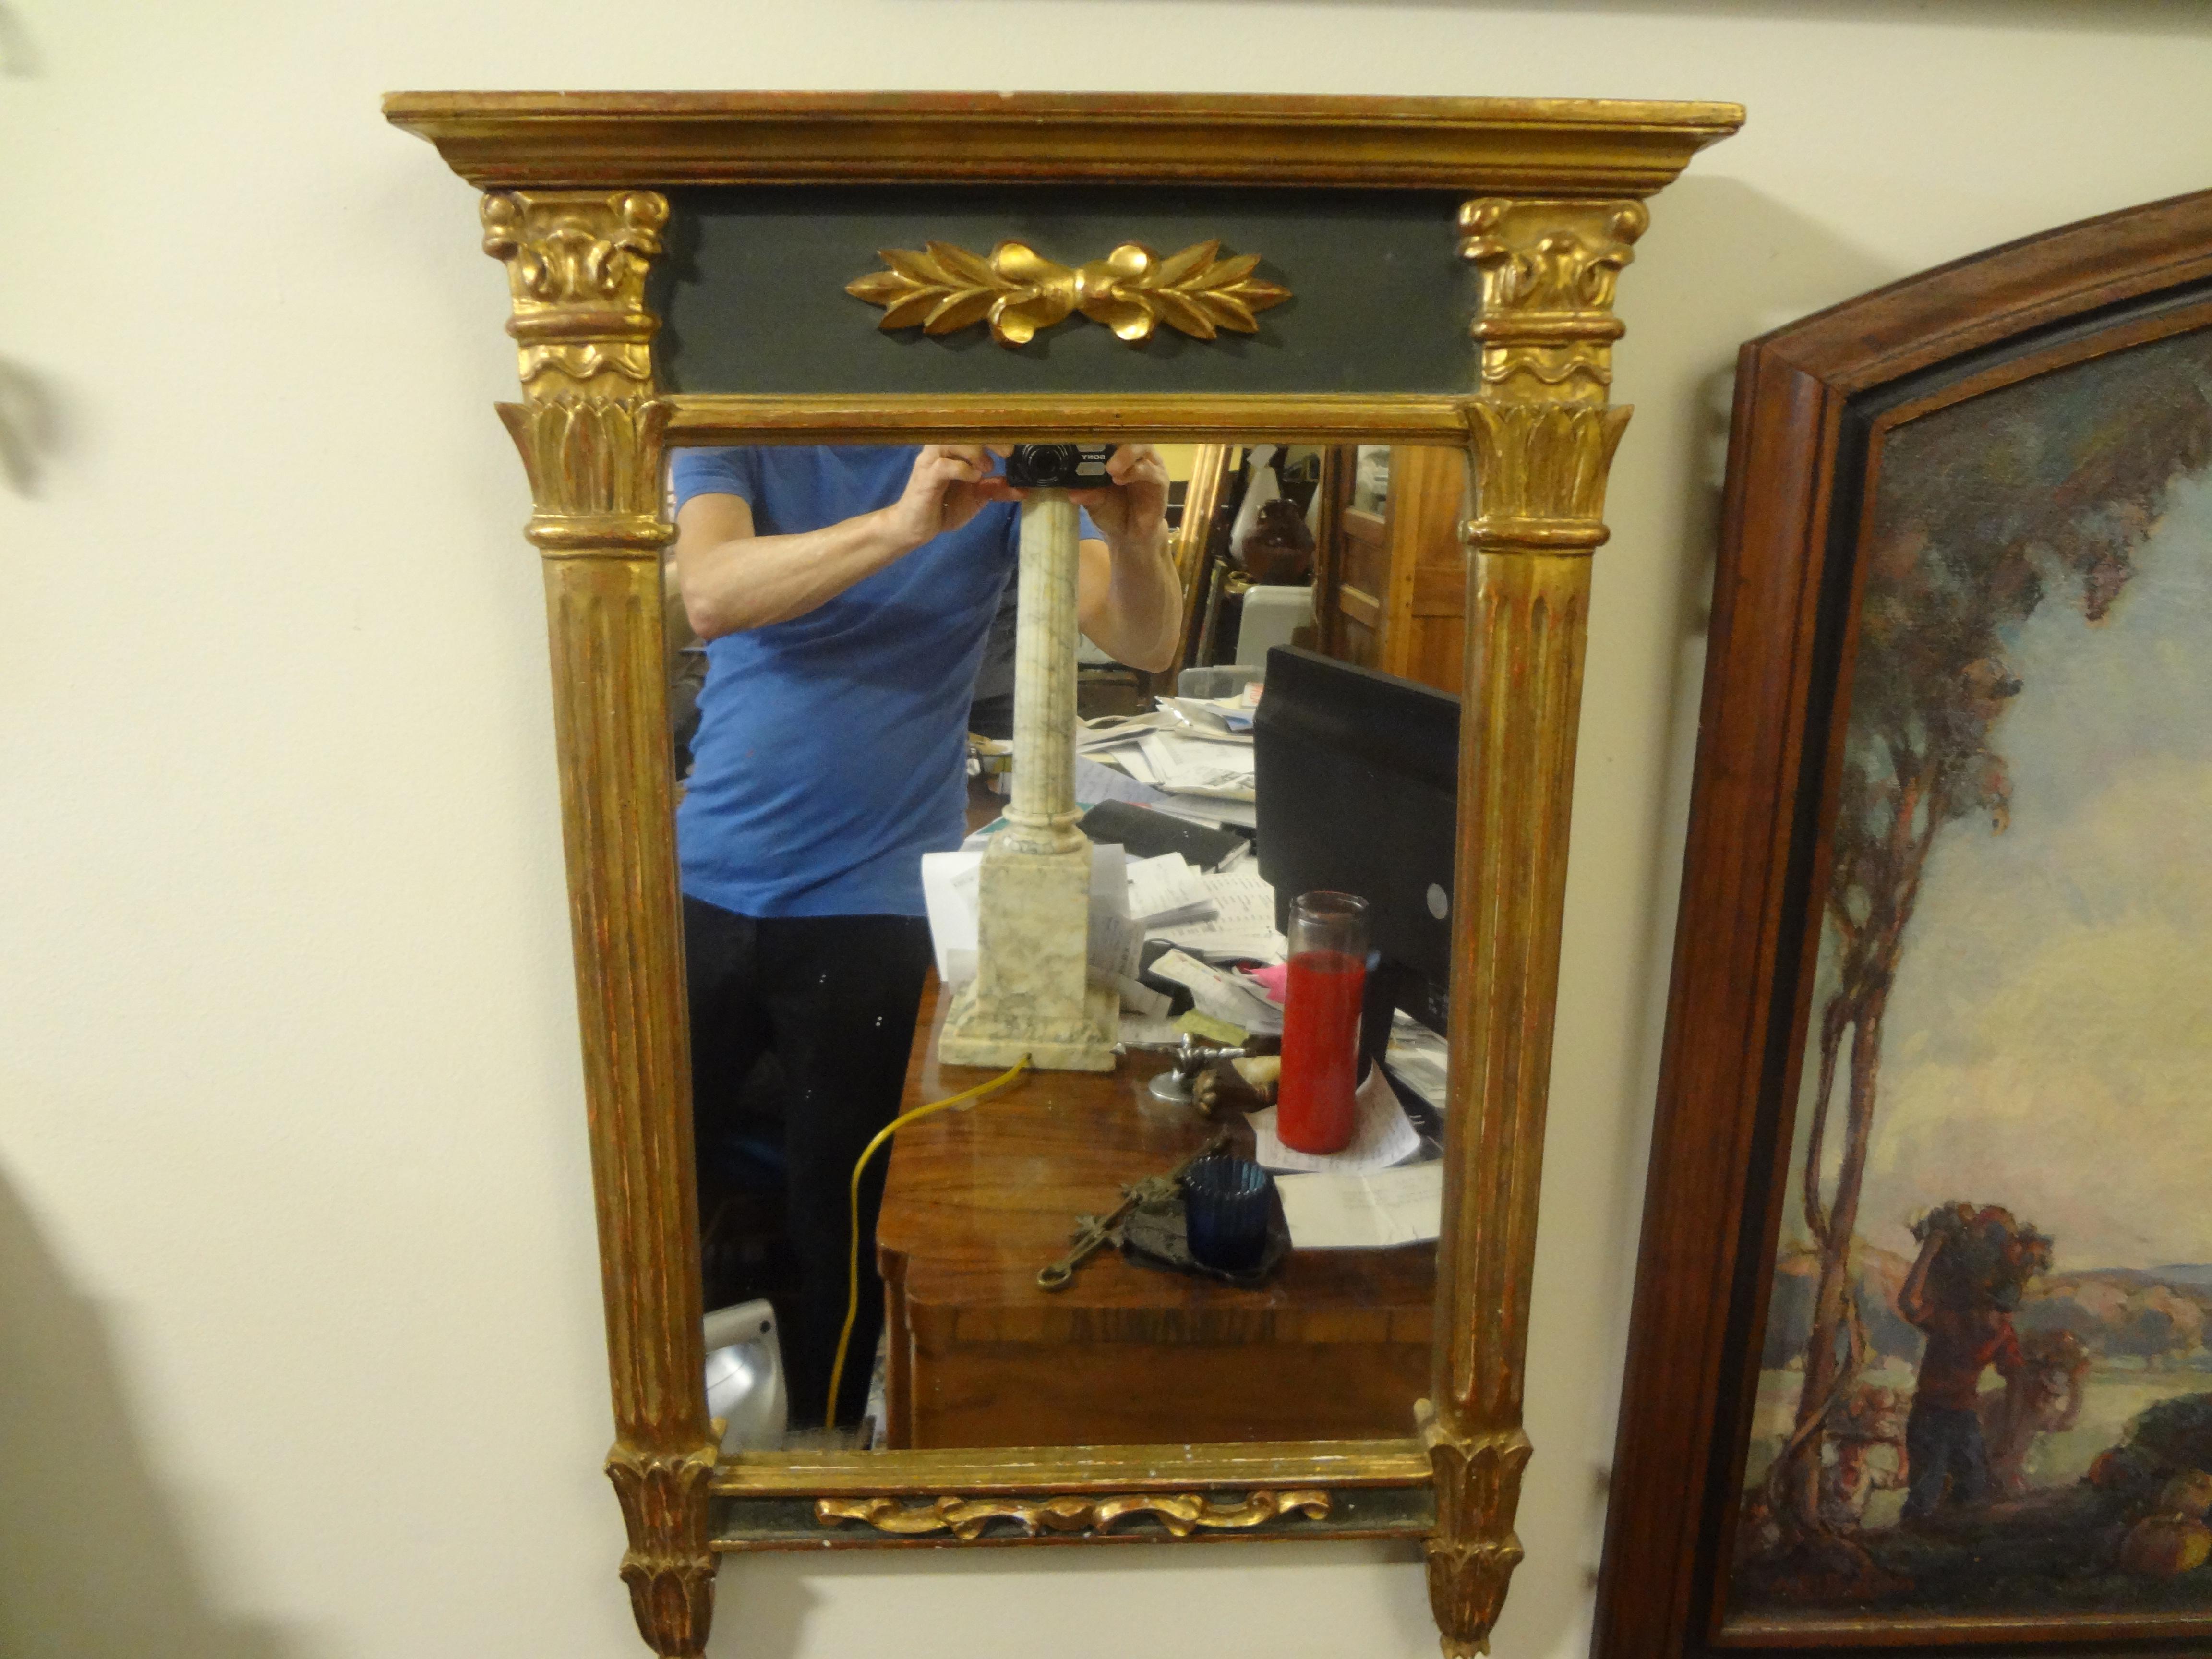 Antique French Louis XVI style giltwood mirror.
Charming French Louis XVI style painted and giltwood mirror. This lovely traditional French gilt wood mirror is flanked by columns on either side. Our French Louis XVI Neoclassical style mirror dates